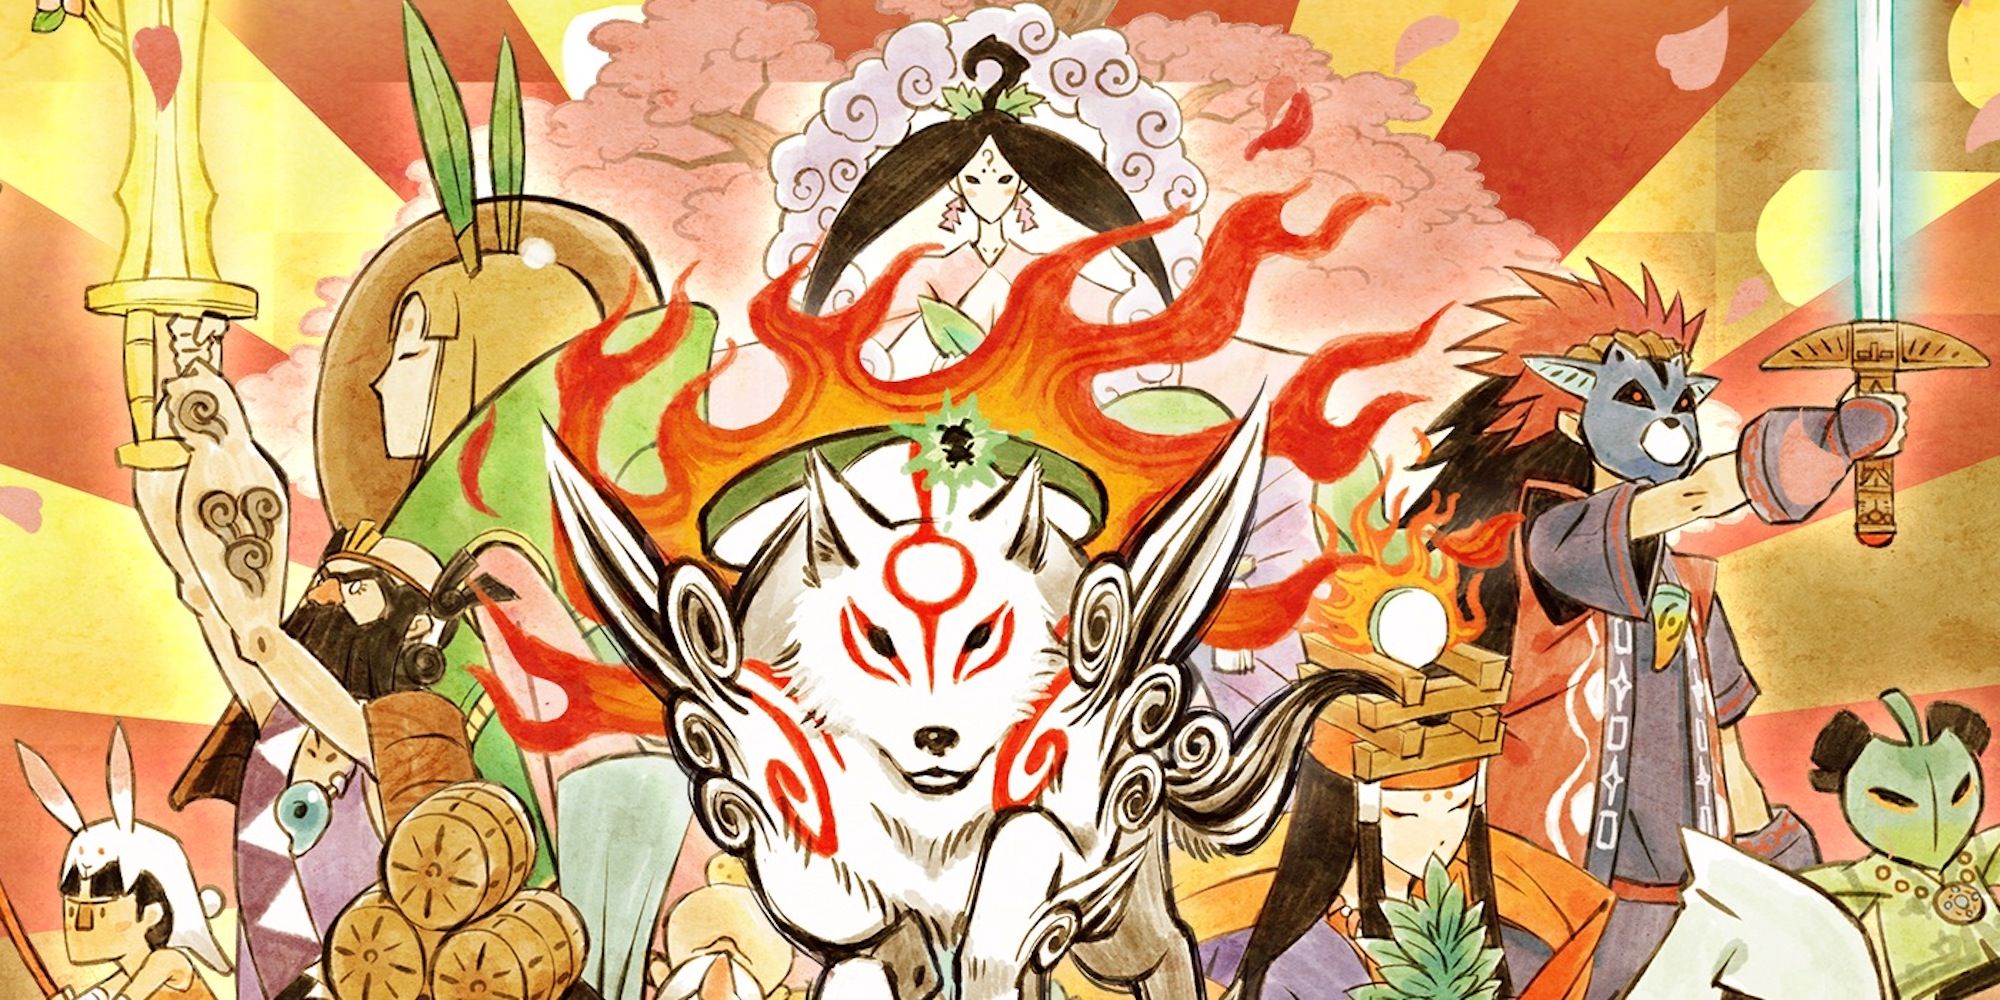 Promo art featuring characters from Okami